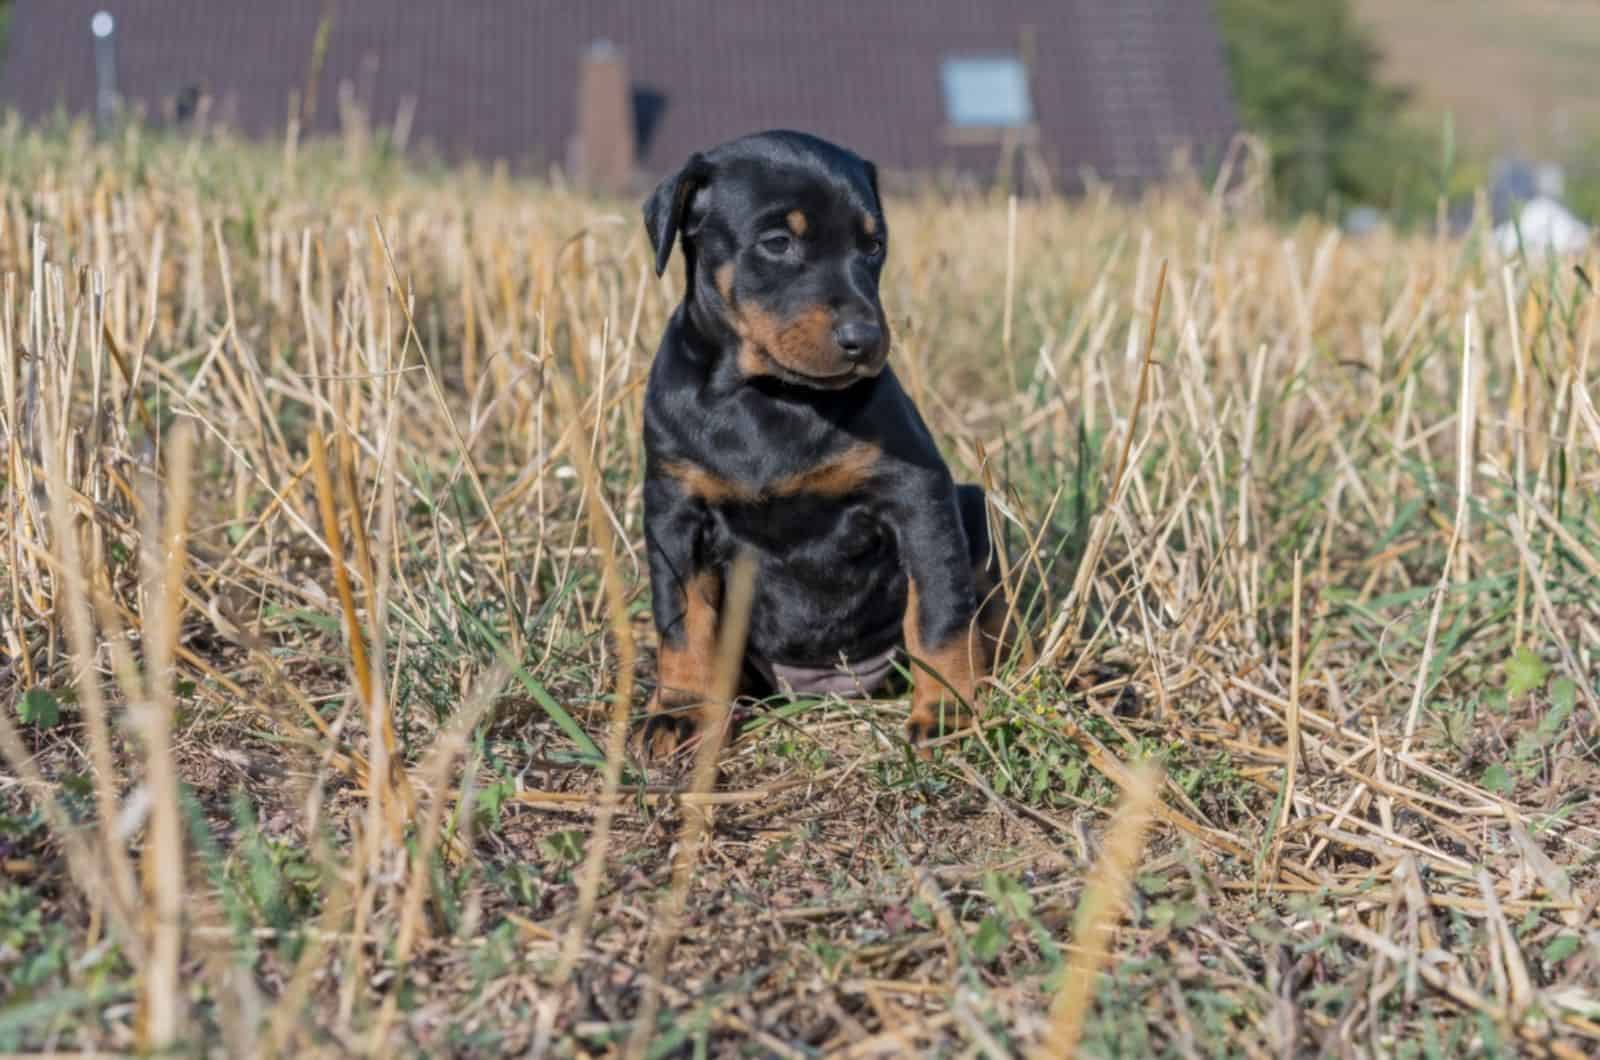 doberman puppy sitting on the ground in nature